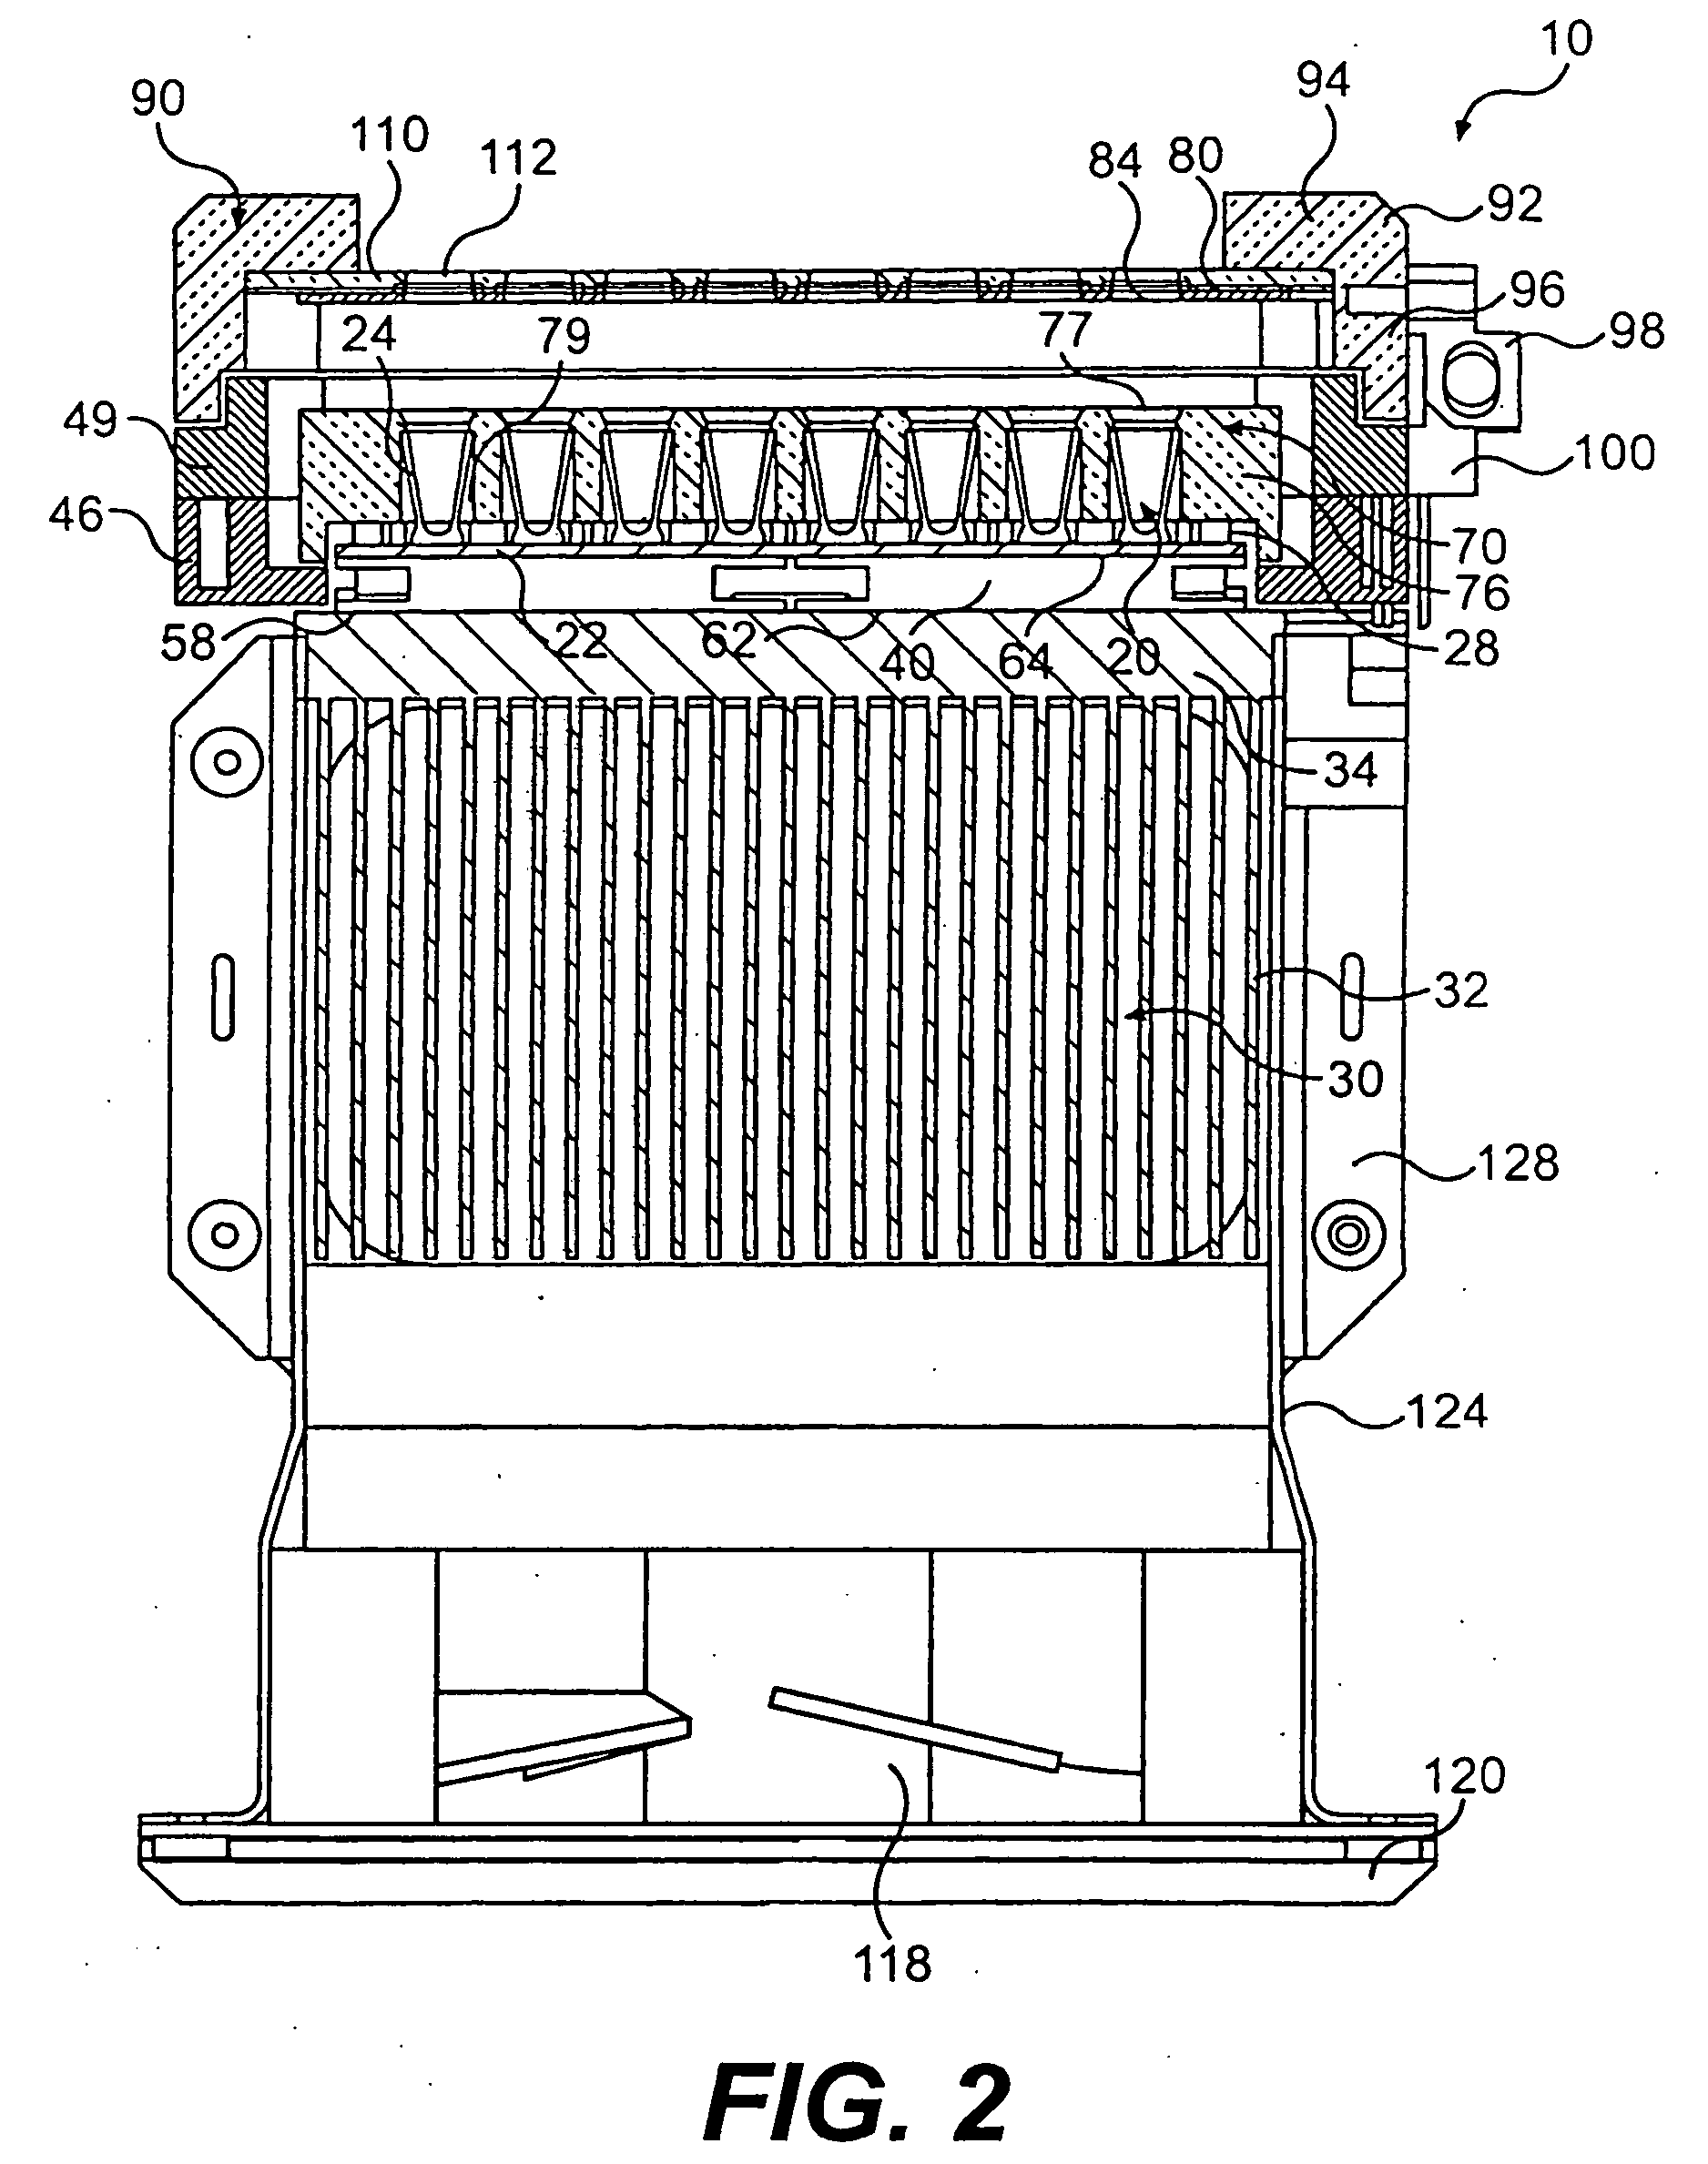 Method for thermally cycling samples of biological material with substantial temperature uniformity